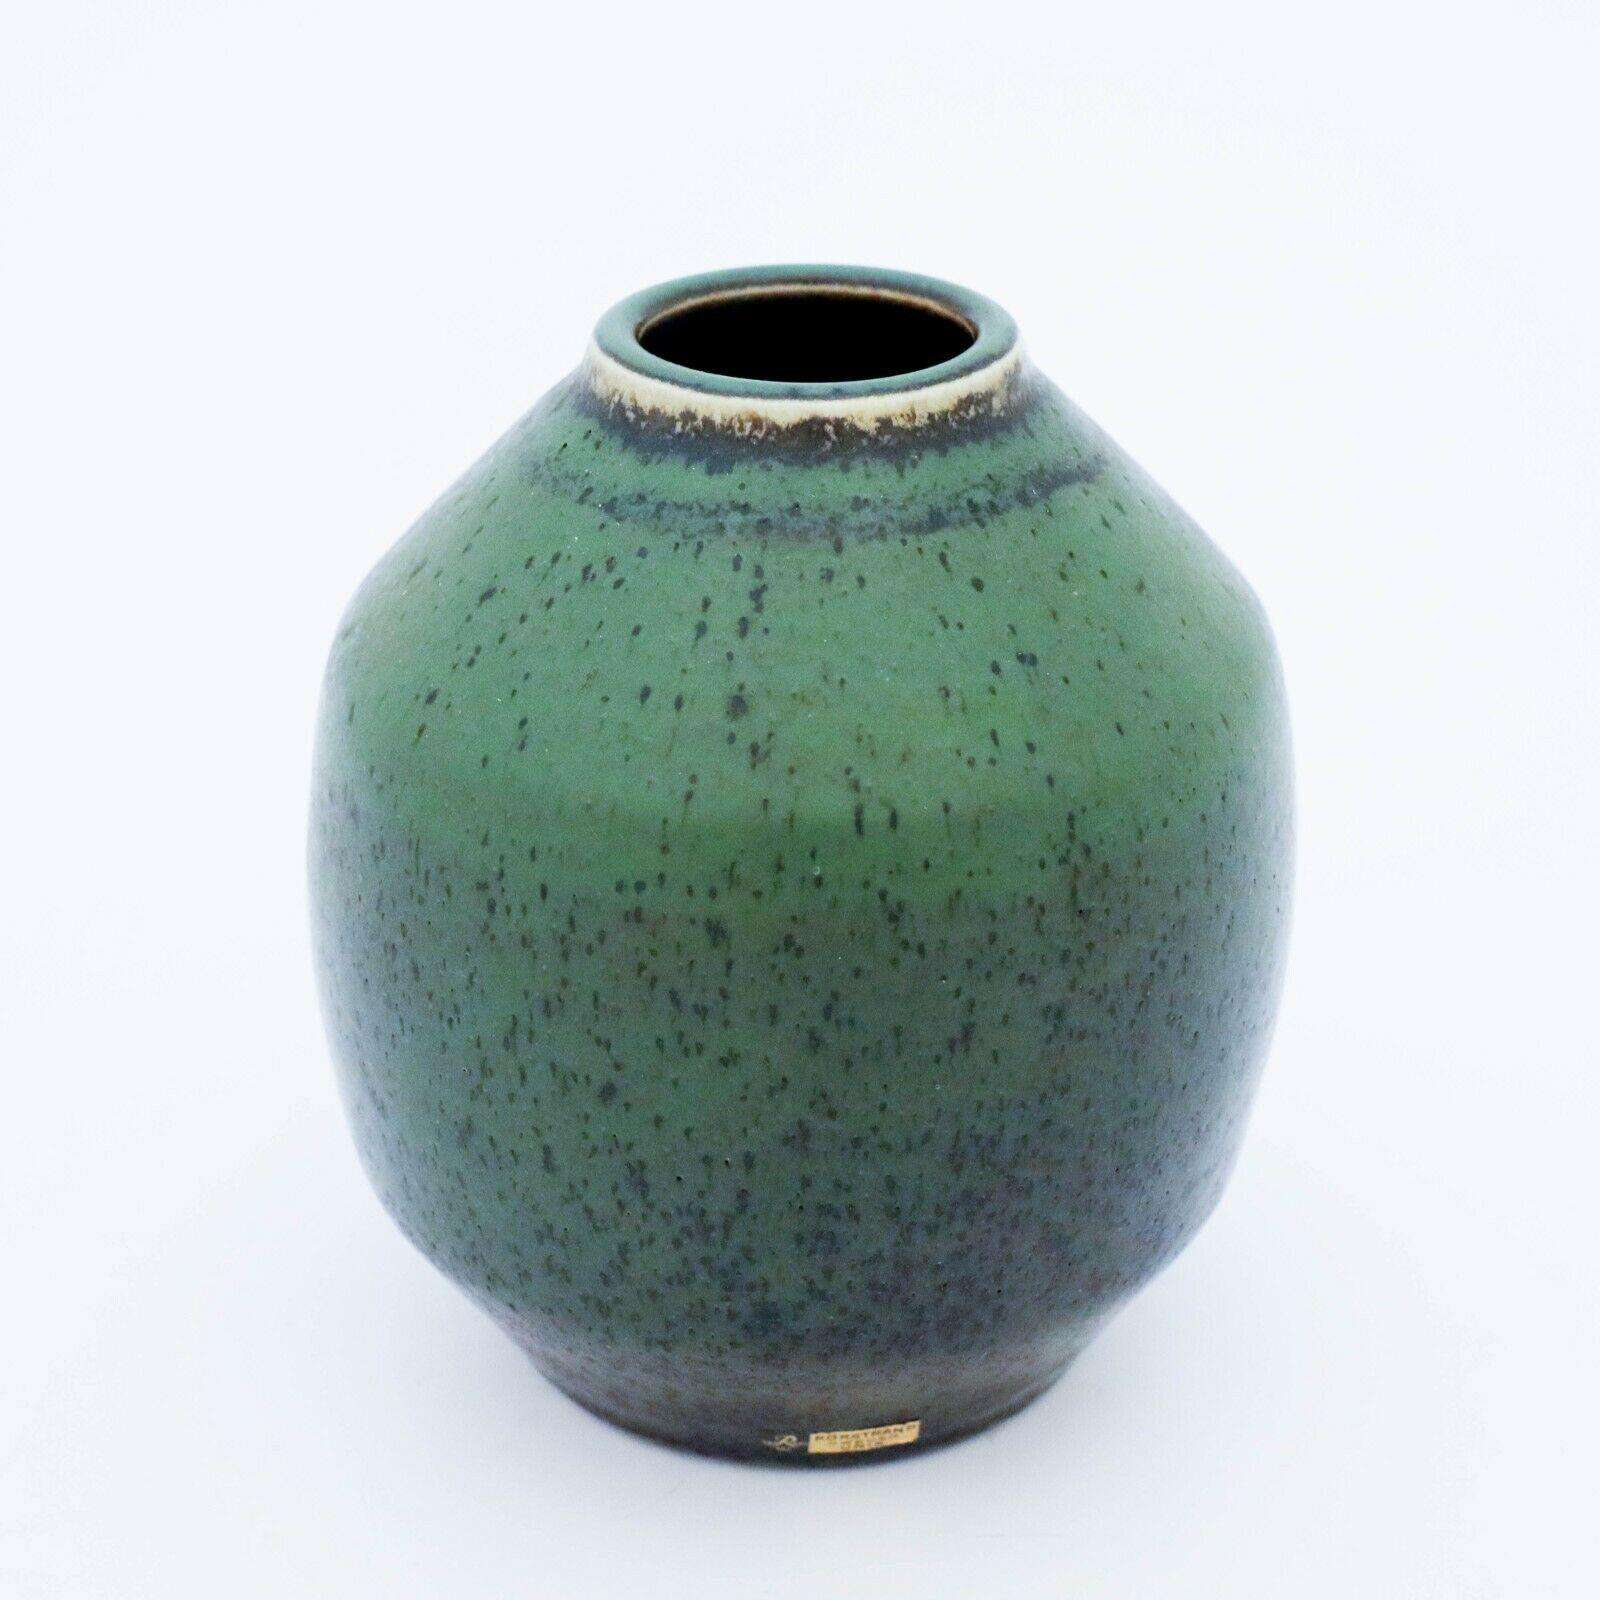 A green midcentury Swedish vase in stoneware by Rörstrand, designed by Carl-Harry Stålhane. This unique vase has an excellent glaze and is in very good vintage condition.